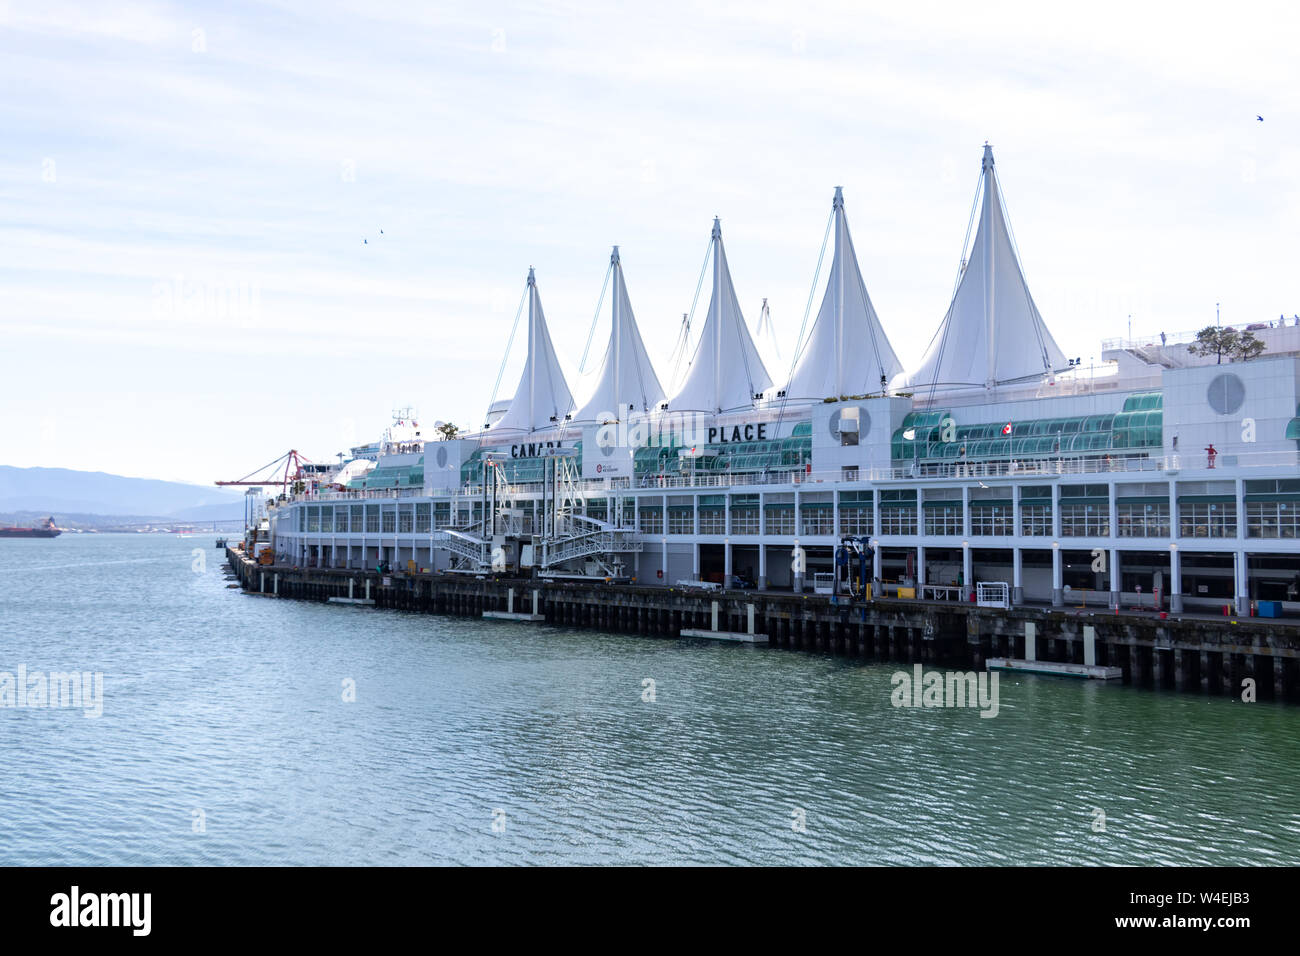 The iconic Canada Place cruise ship dock seen empty on a sunny spring day. Stock Photo